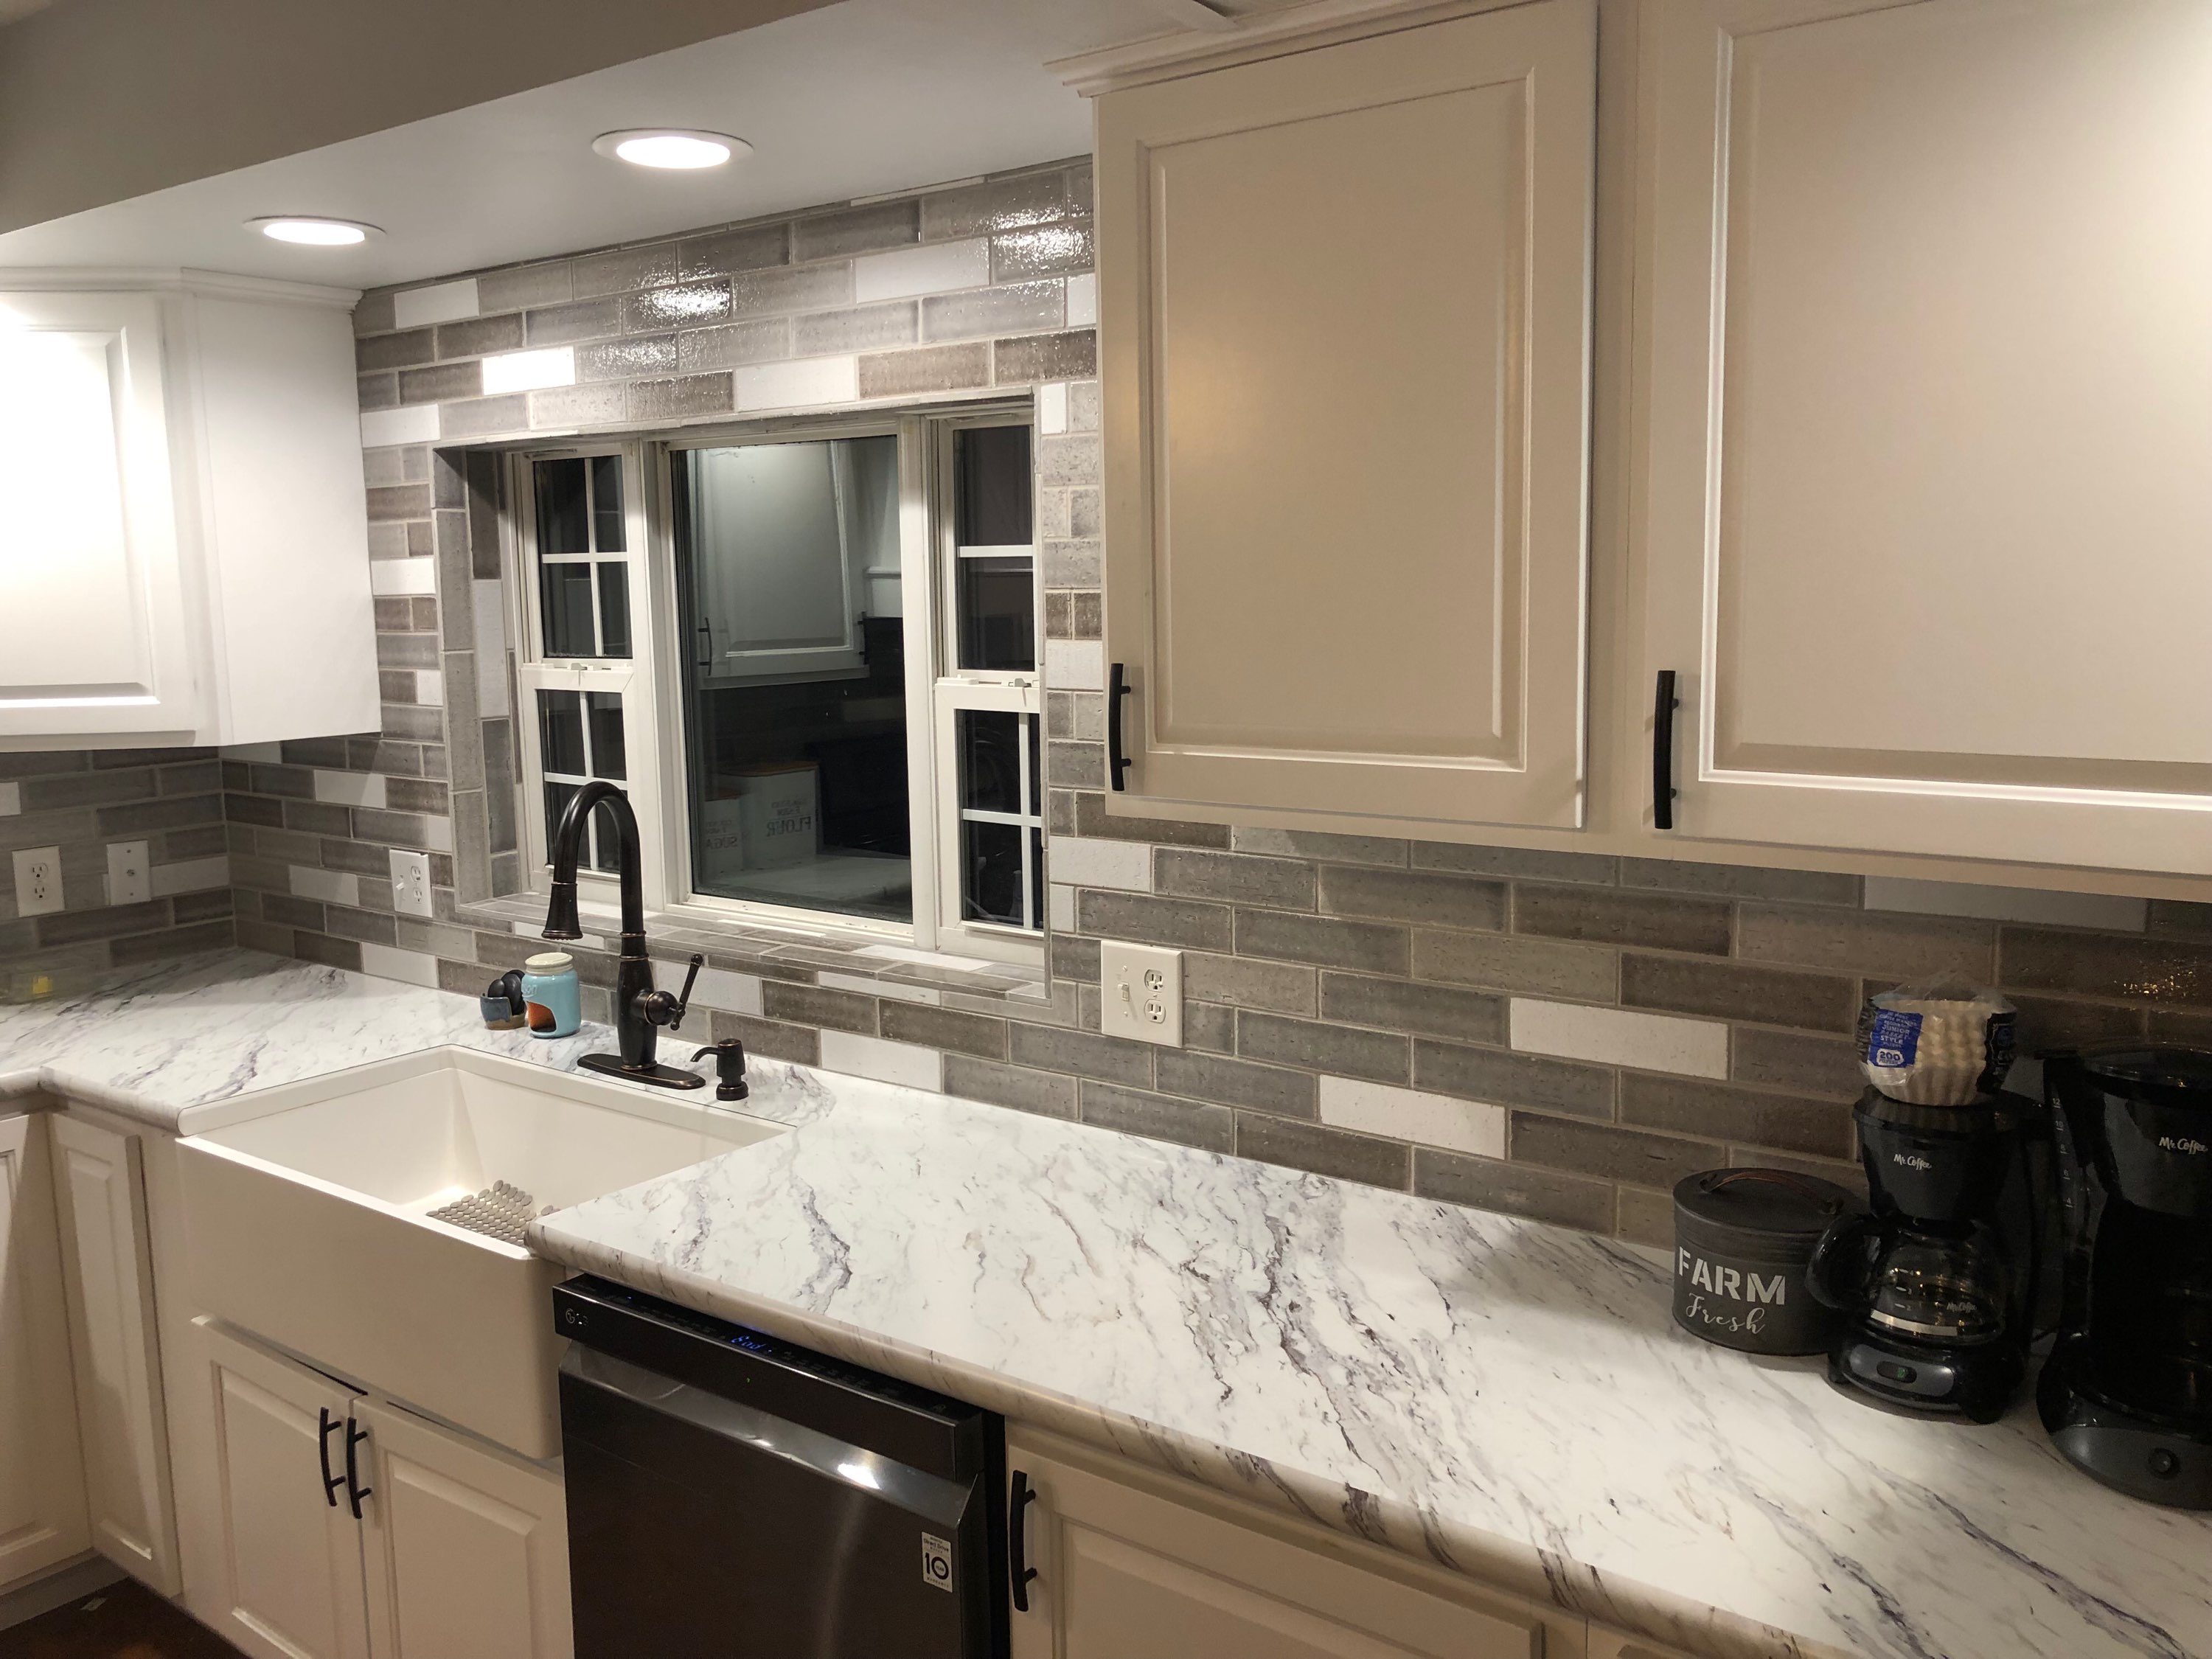 This customer was just as thrilled as we were with the way their backsplash turned out...beautiful!